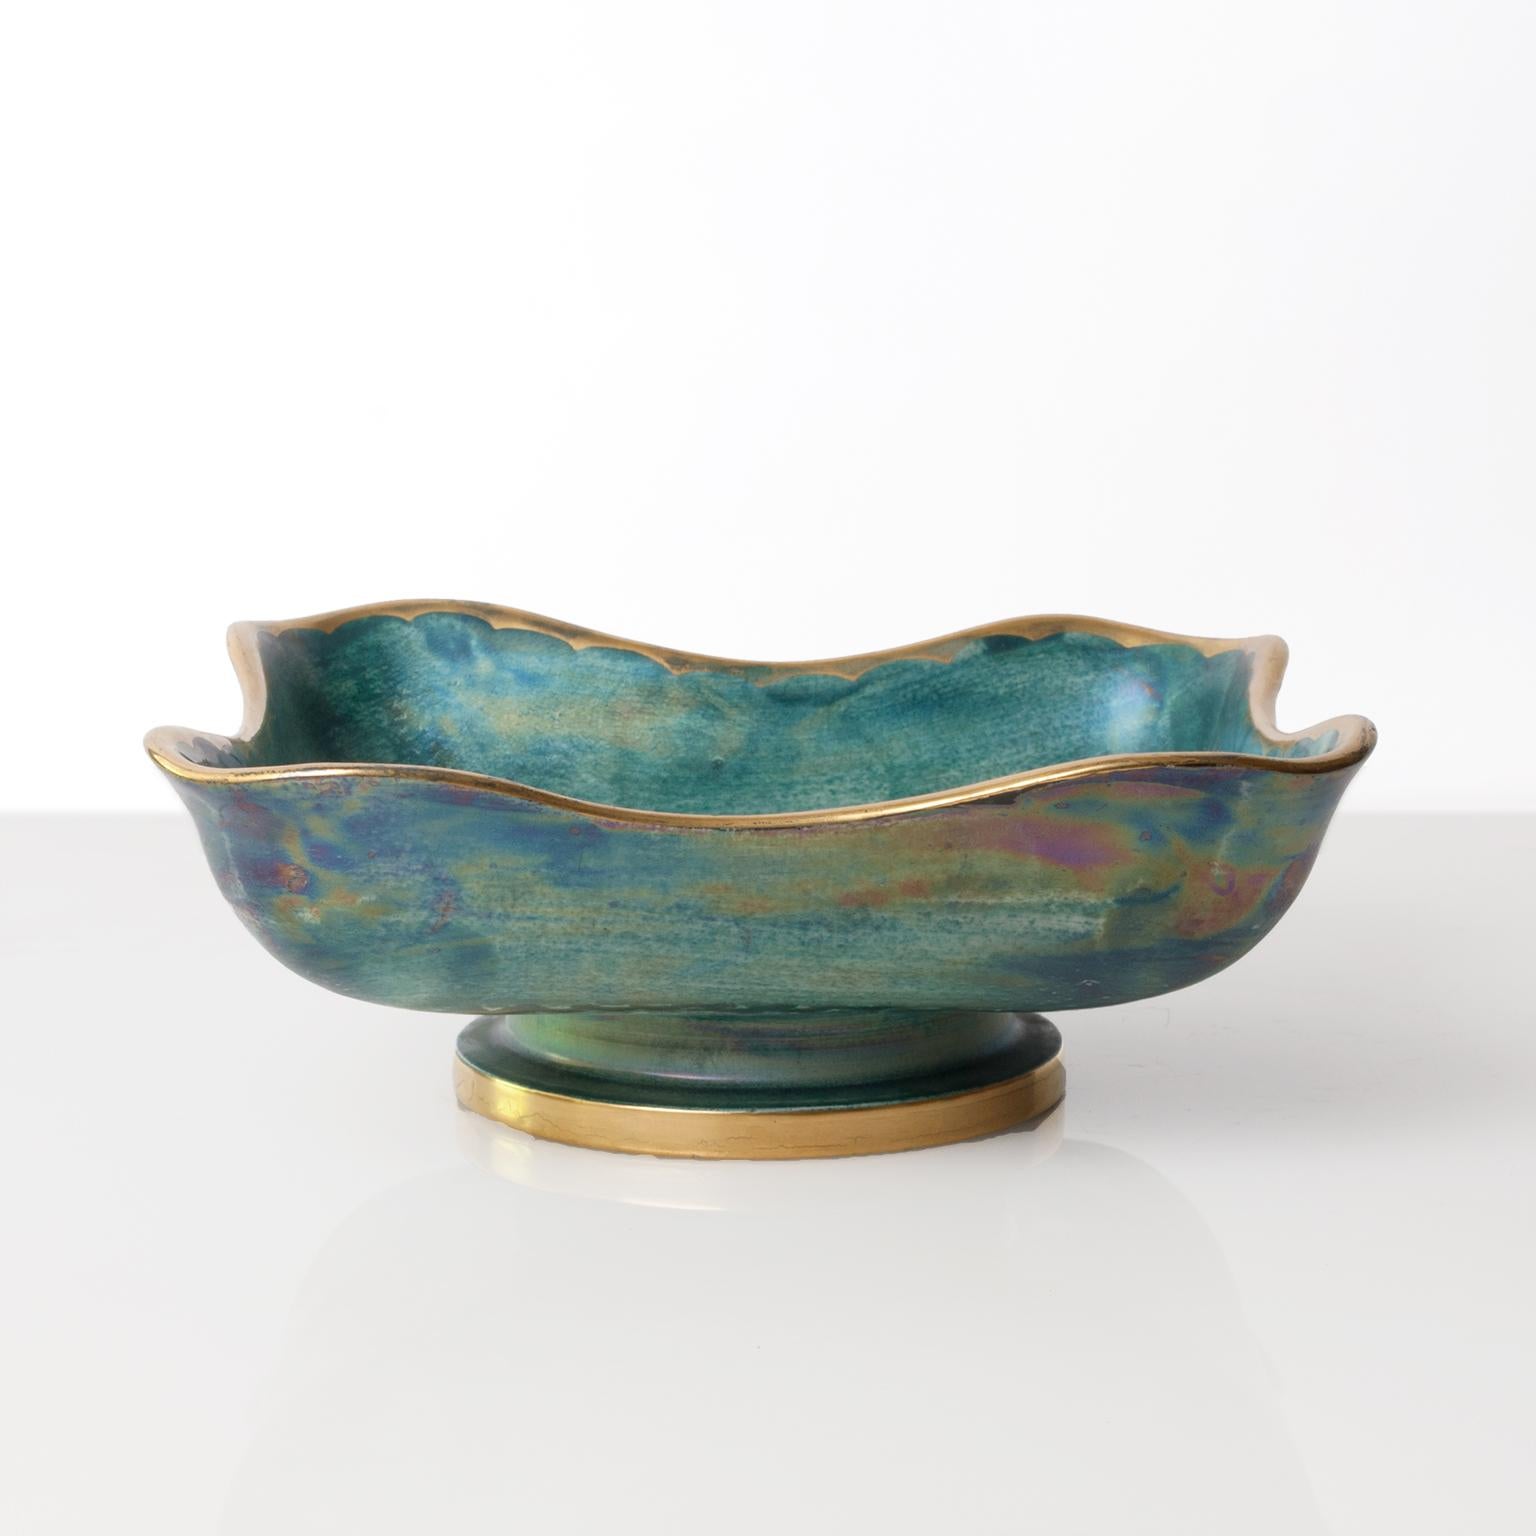 Scandinavian Modern ceramic bowl with a soft organic form with a luster glaze in blue and green and a hand-painted floral design and trim in gold. Designed by Josef Ekberg for Gustavsberg, Sweden, signed and dated 1936.
 
Measures: Height 3.25